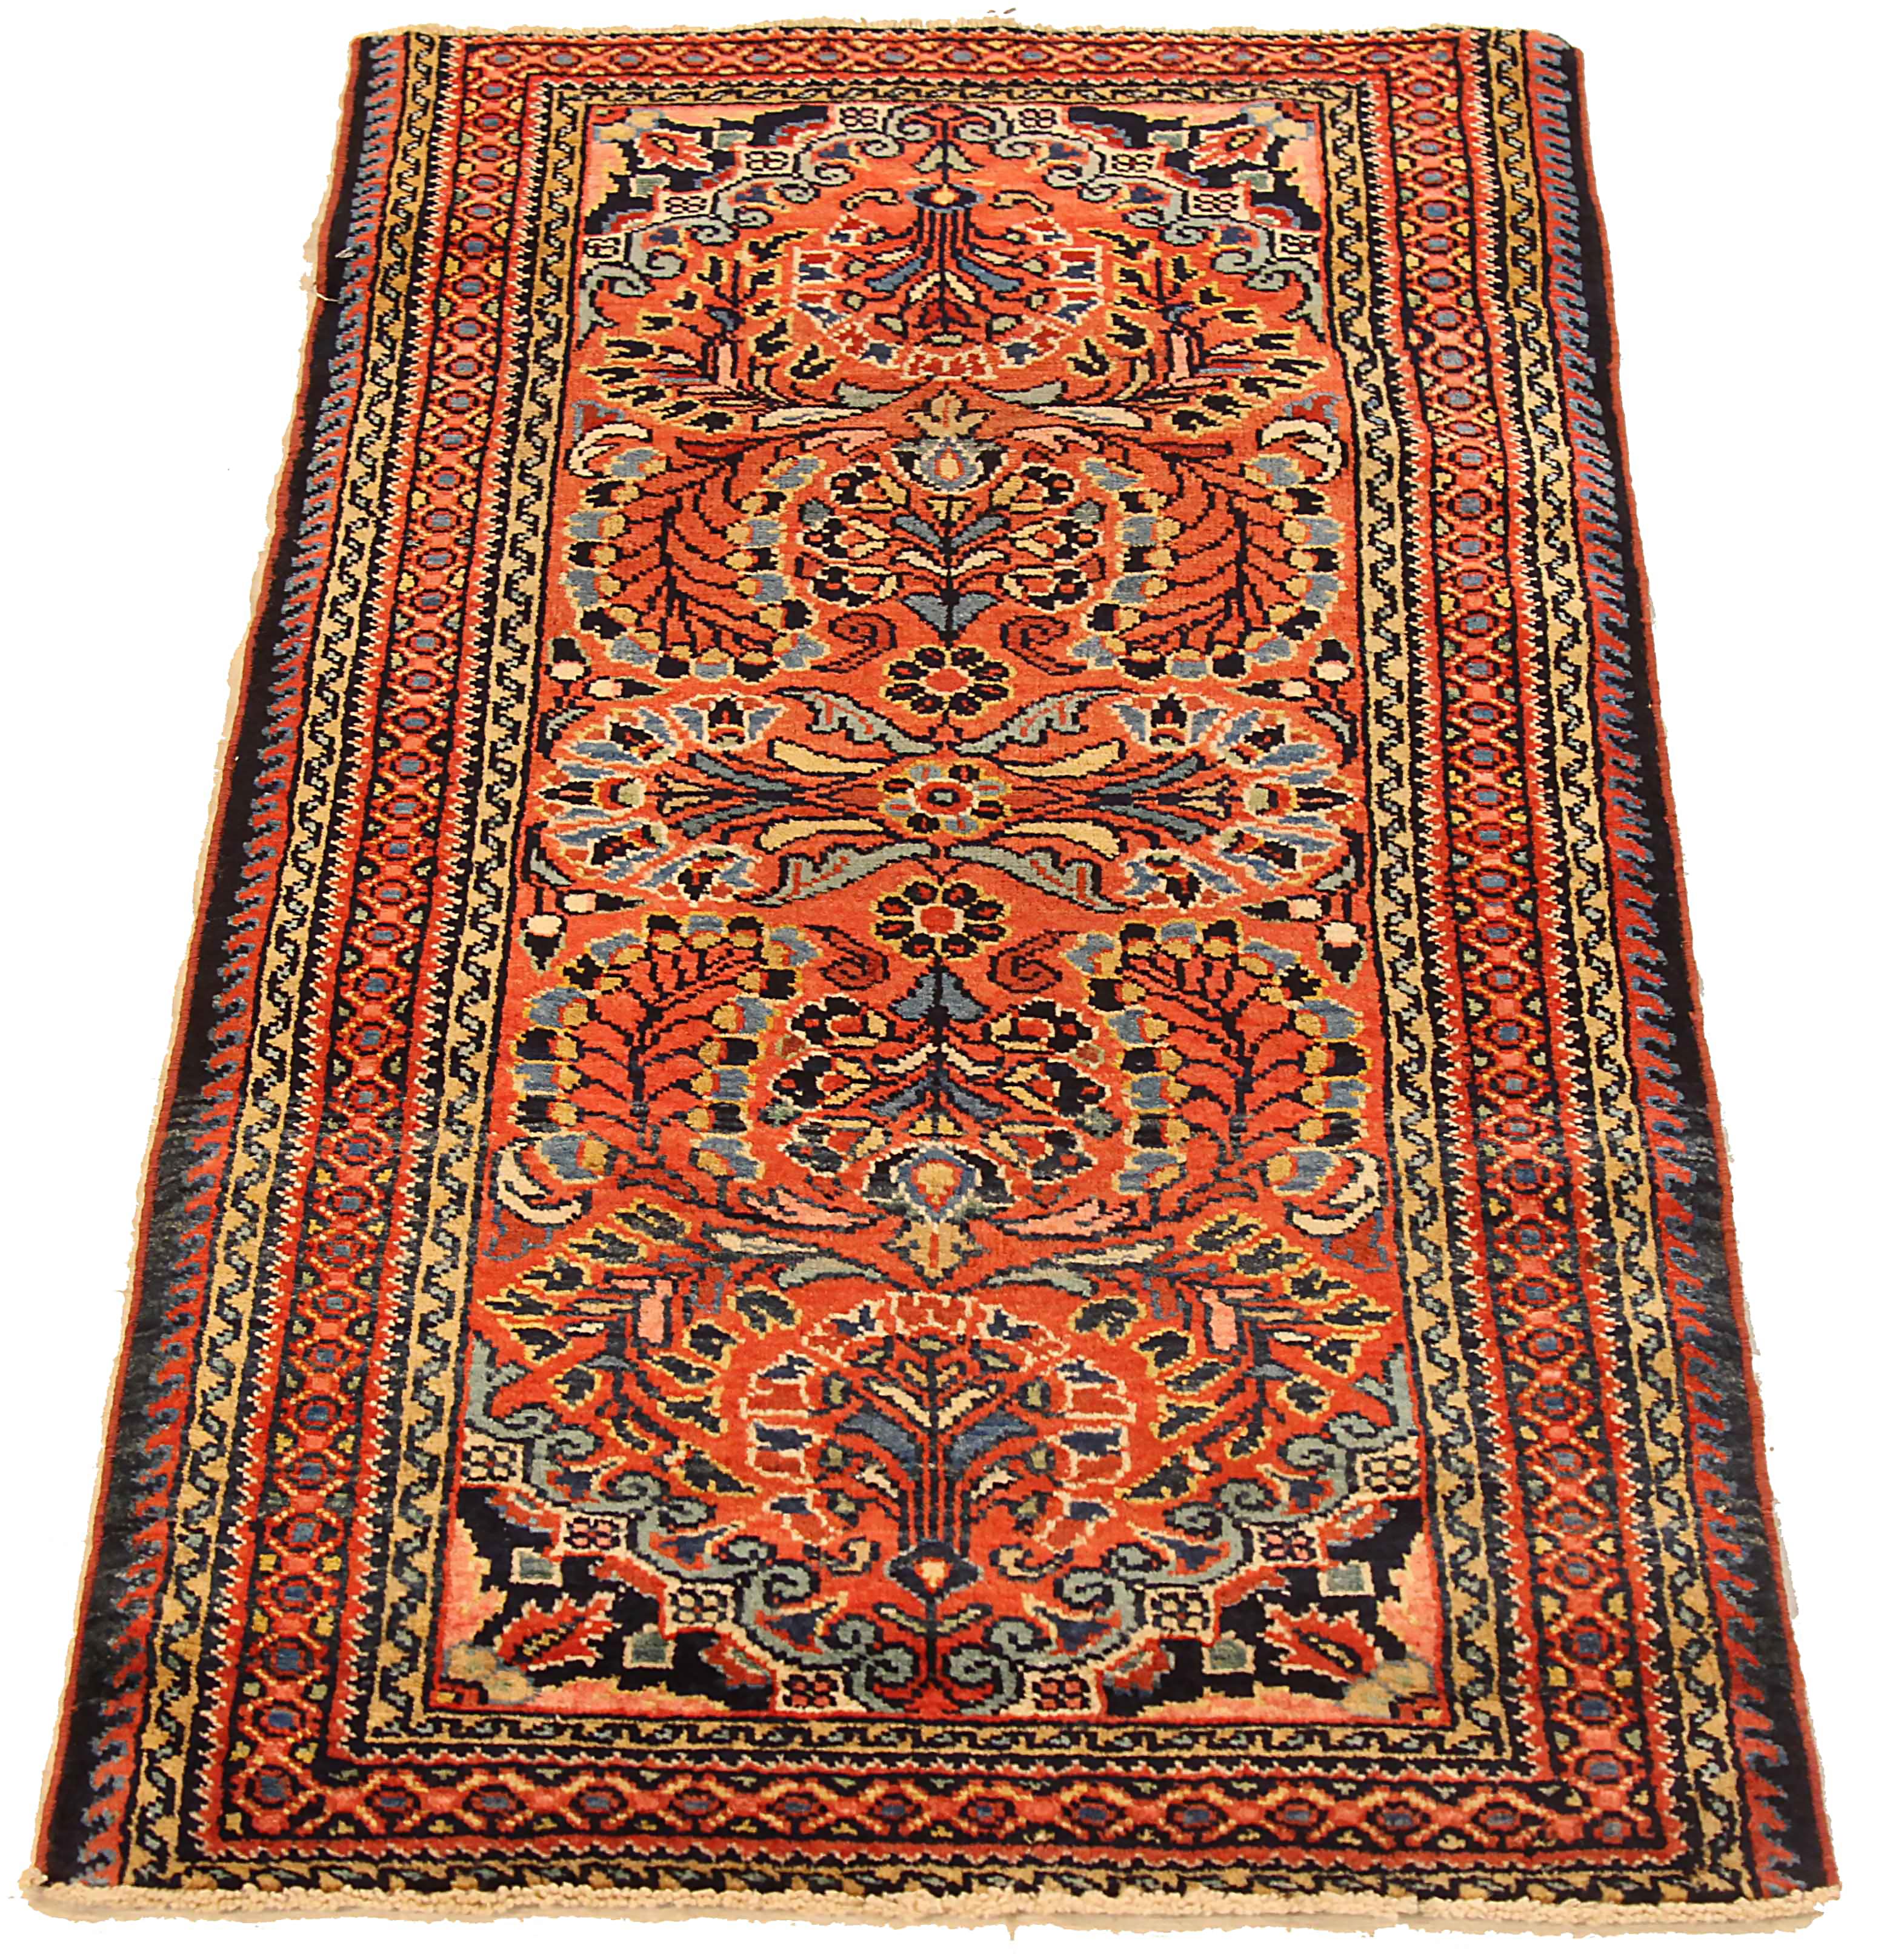 Antique Persian area rug handwoven from the finest sheep’s wool. It’s colored with all-natural vegetable dyes that are safe for humans and pets. It’s a traditional Lilian design handwoven by expert artisans. It’s a lovely area rug that can be